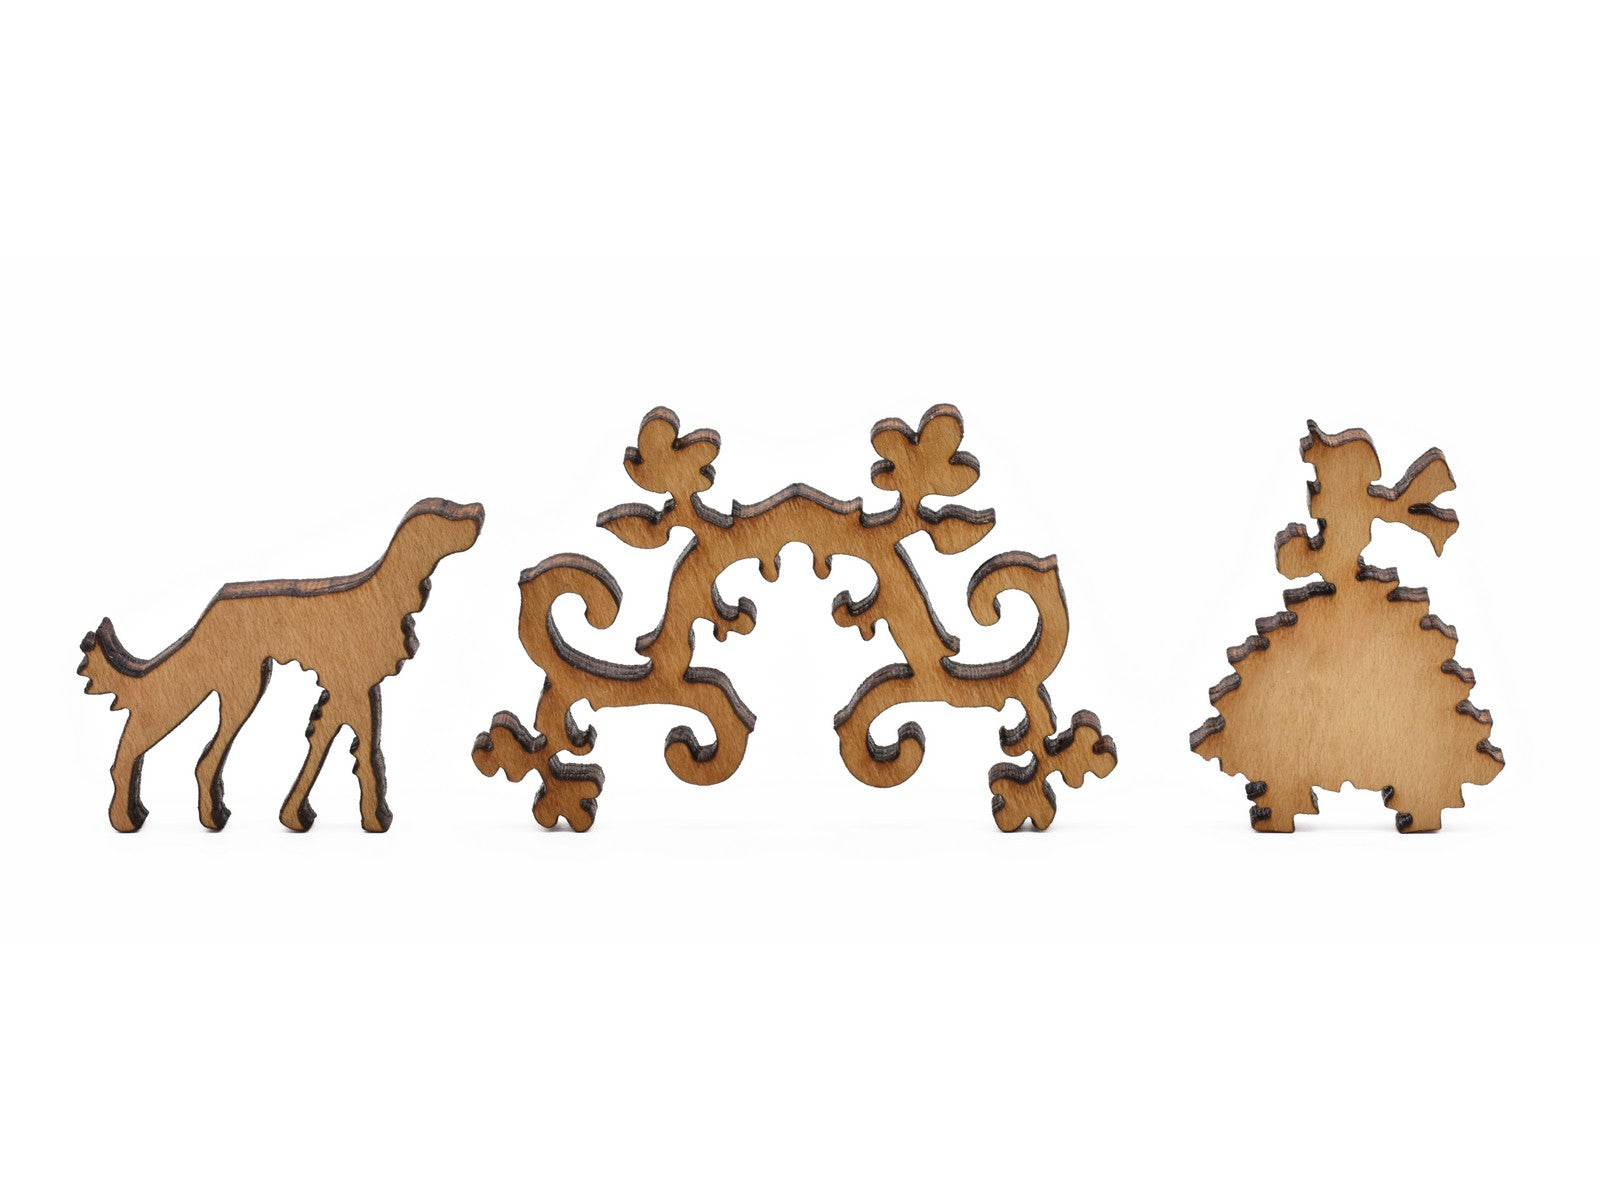 A closeup of pieces in the shape of a dog, vines, and a woman.